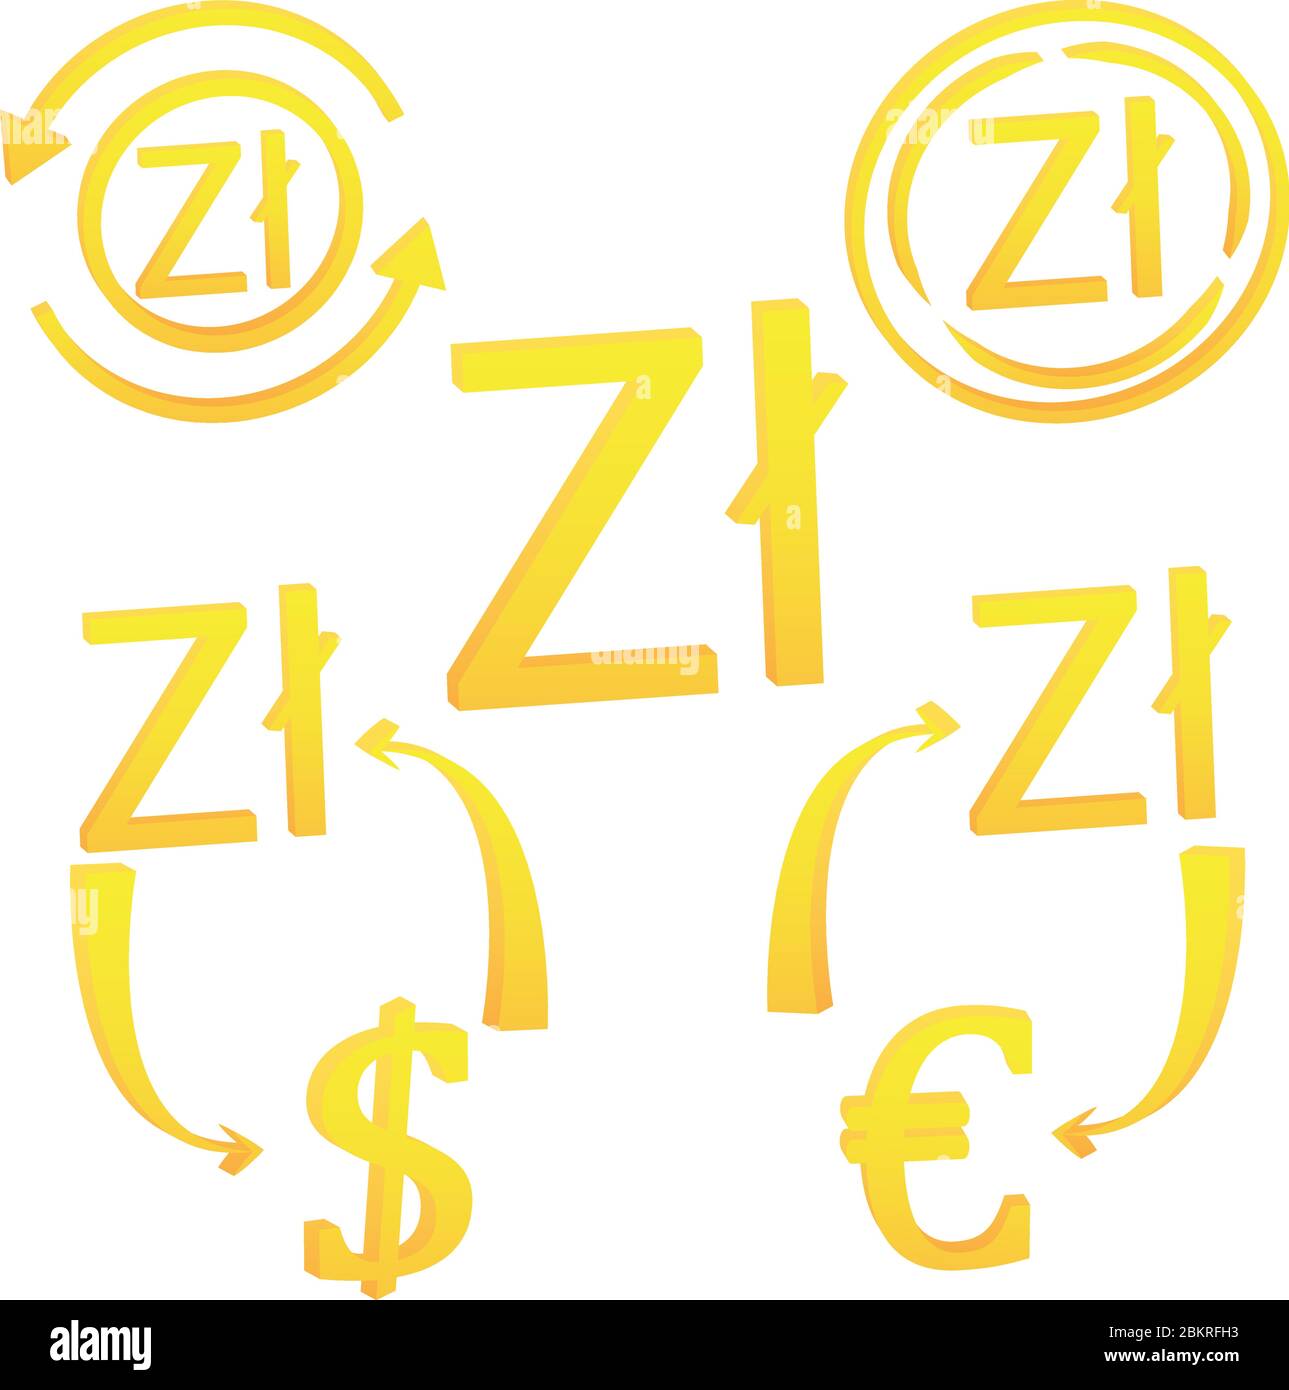 3D Zloty Polish symbol currency unit icon Stock Vector